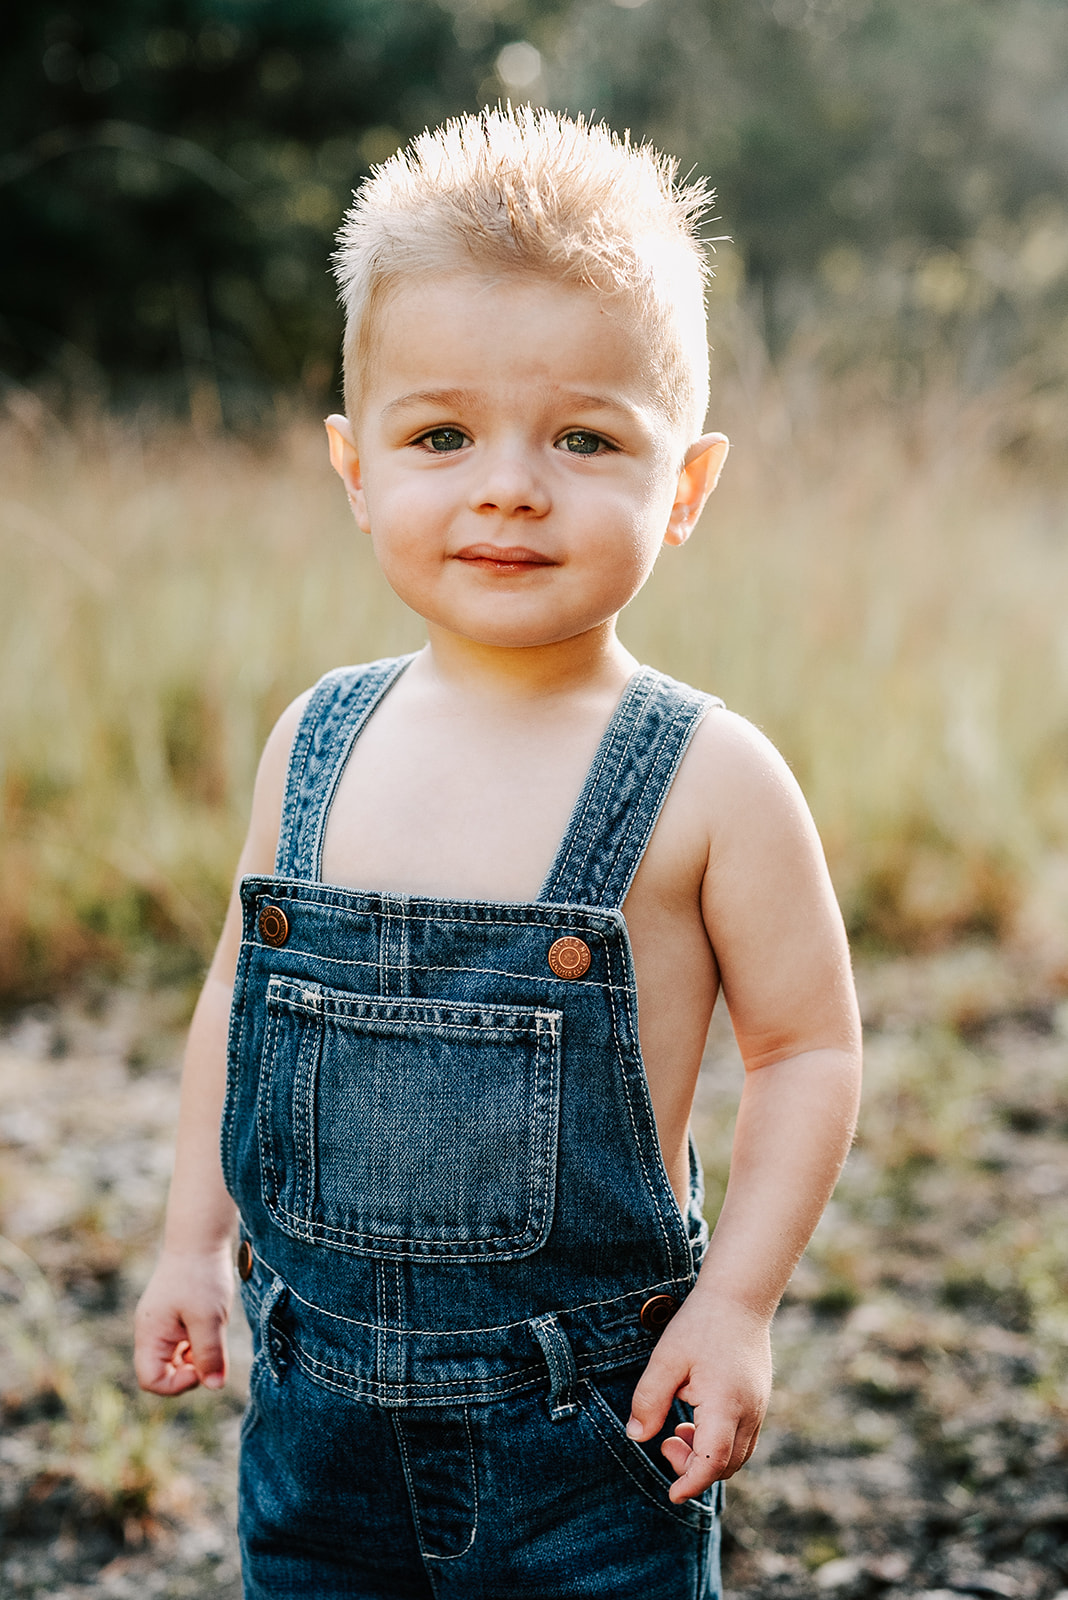 A young boy in blue overalls stands in a forest at sunset before doing some Asheville Apple Picking